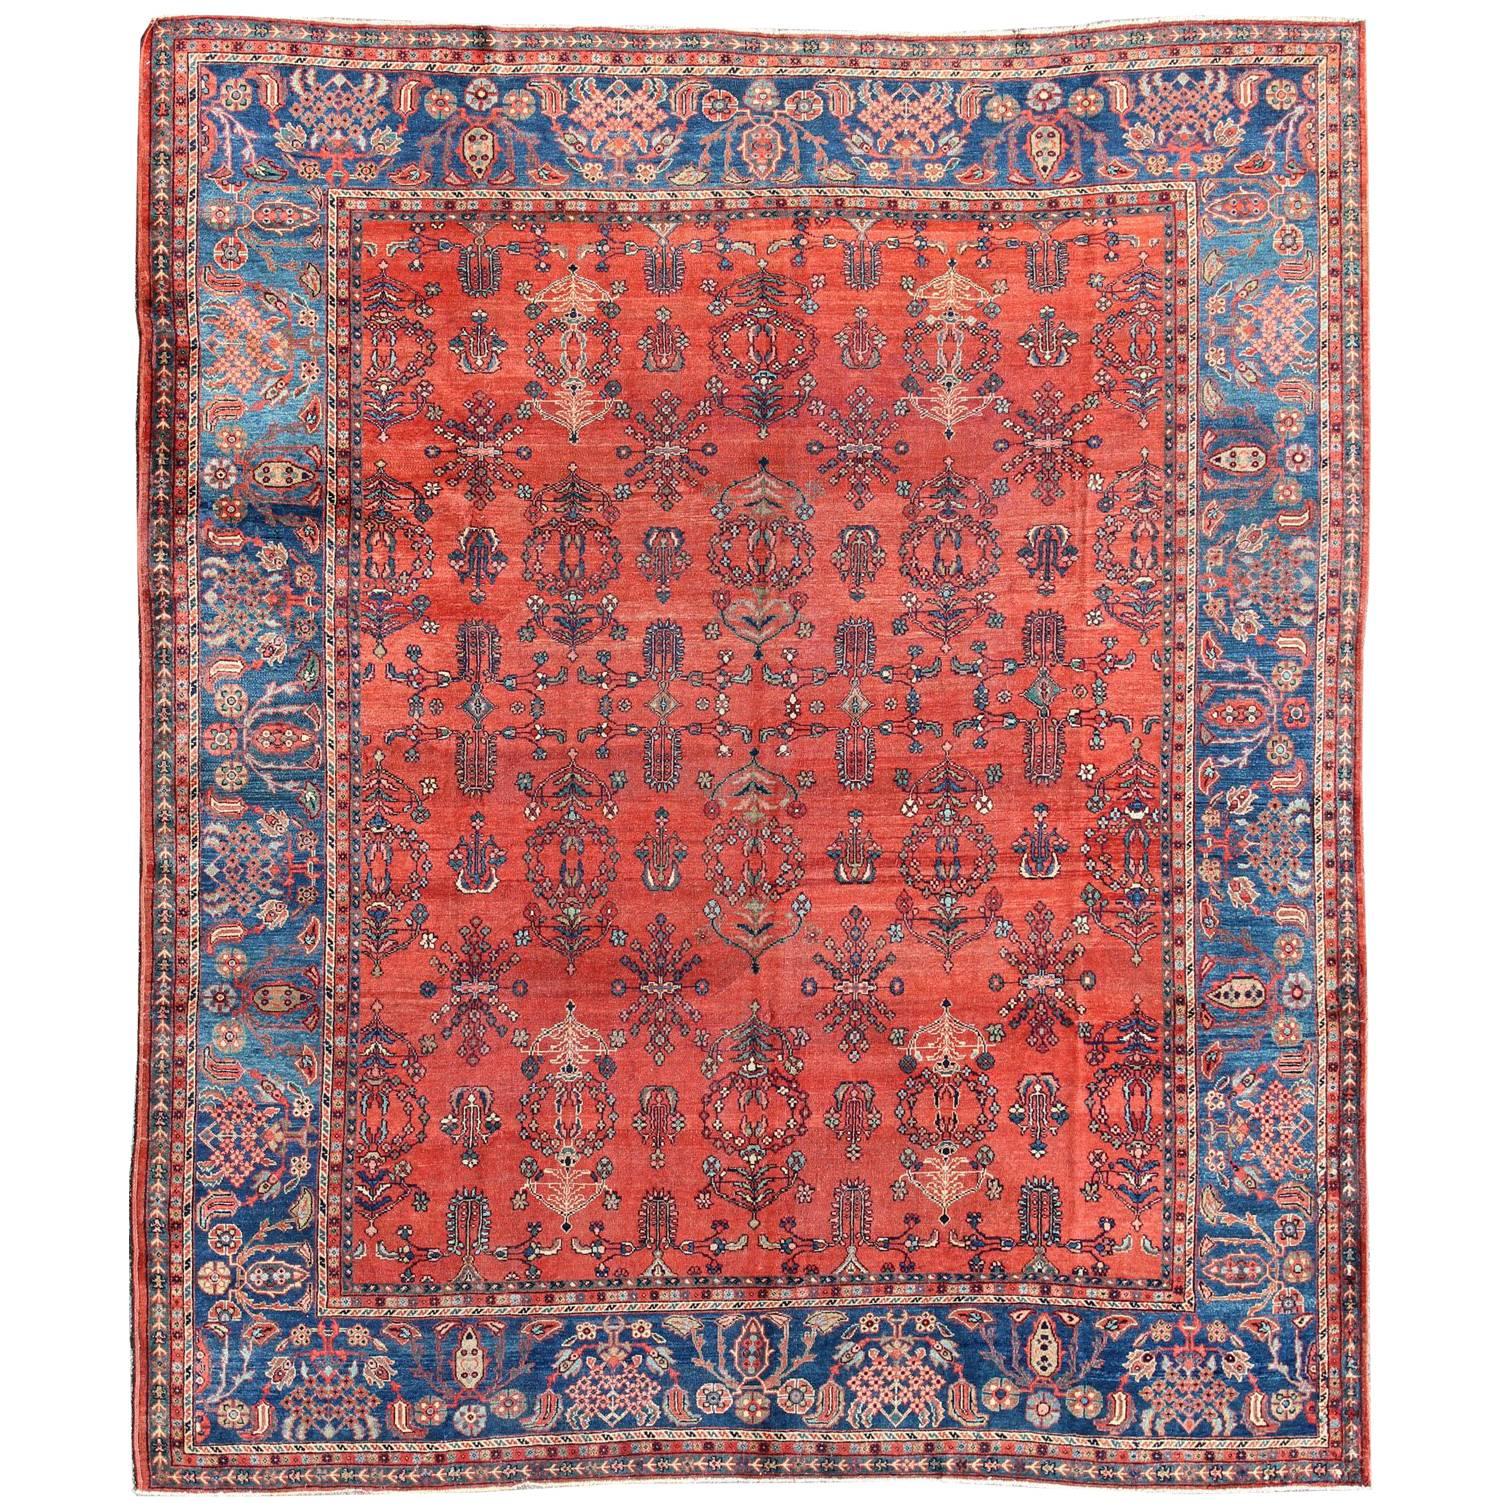 Square-Sized Antique Persian Sultanabad Rug in Terracotta Red and Medium Blue For Sale